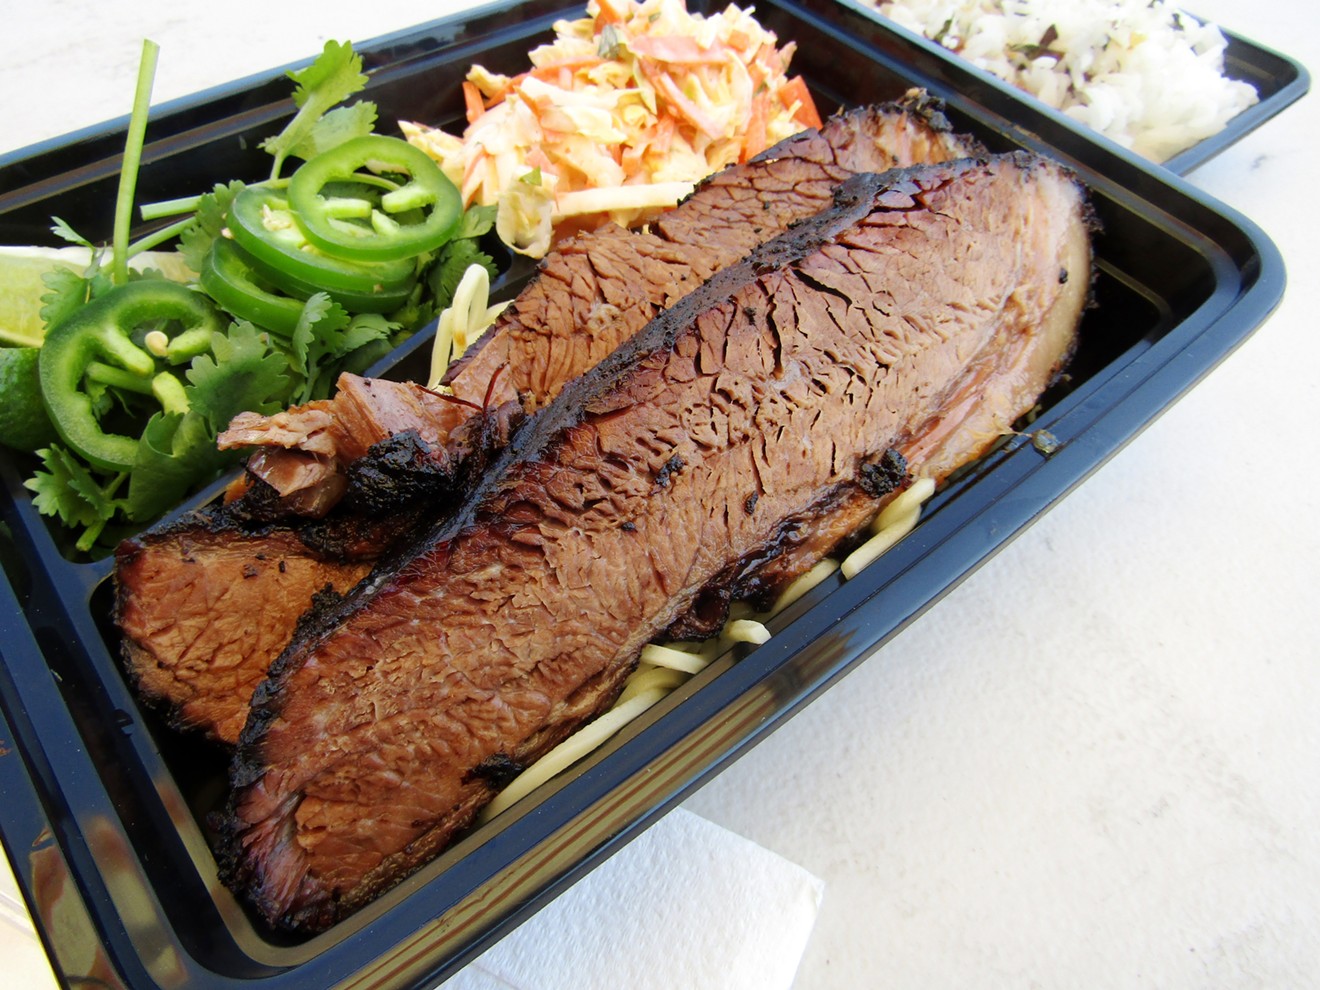 Smoked brisket with noodles, slaw and Vietnamese-style garnishes from Gypsy Q.